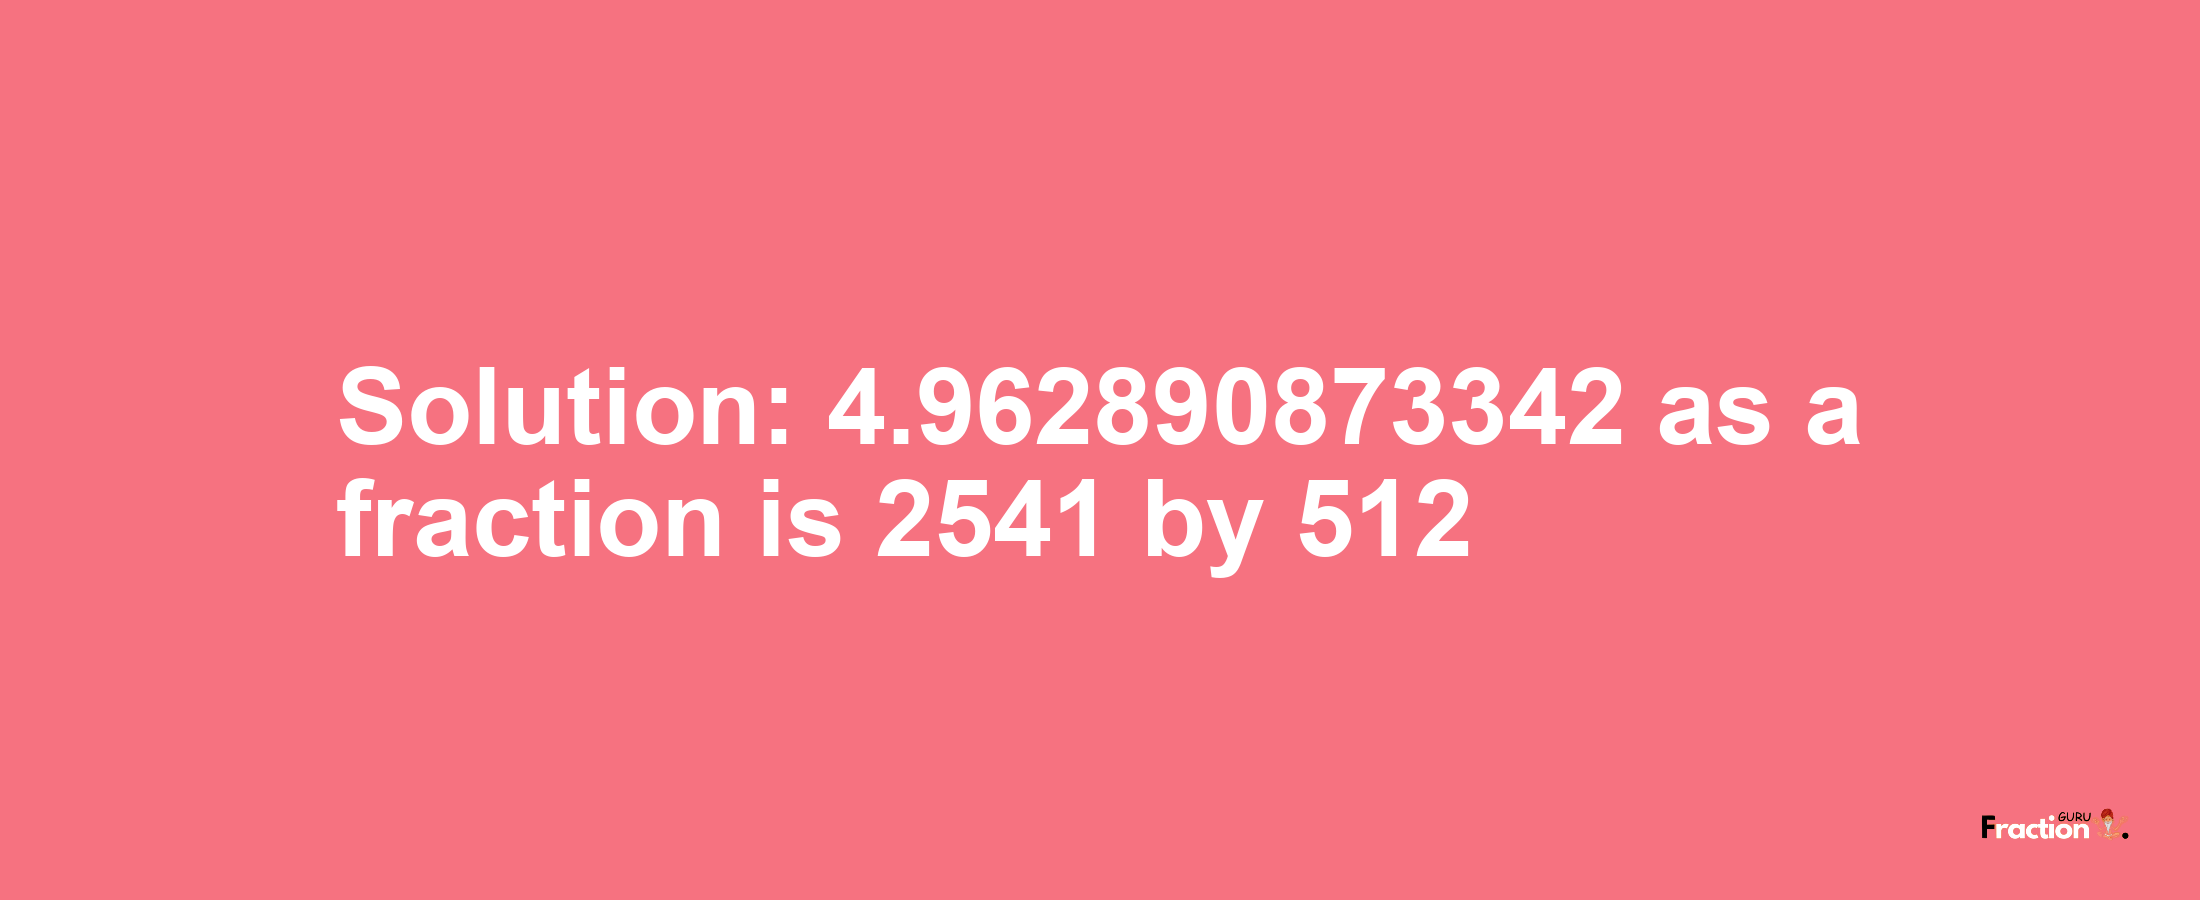 Solution:4.962890873342 as a fraction is 2541/512